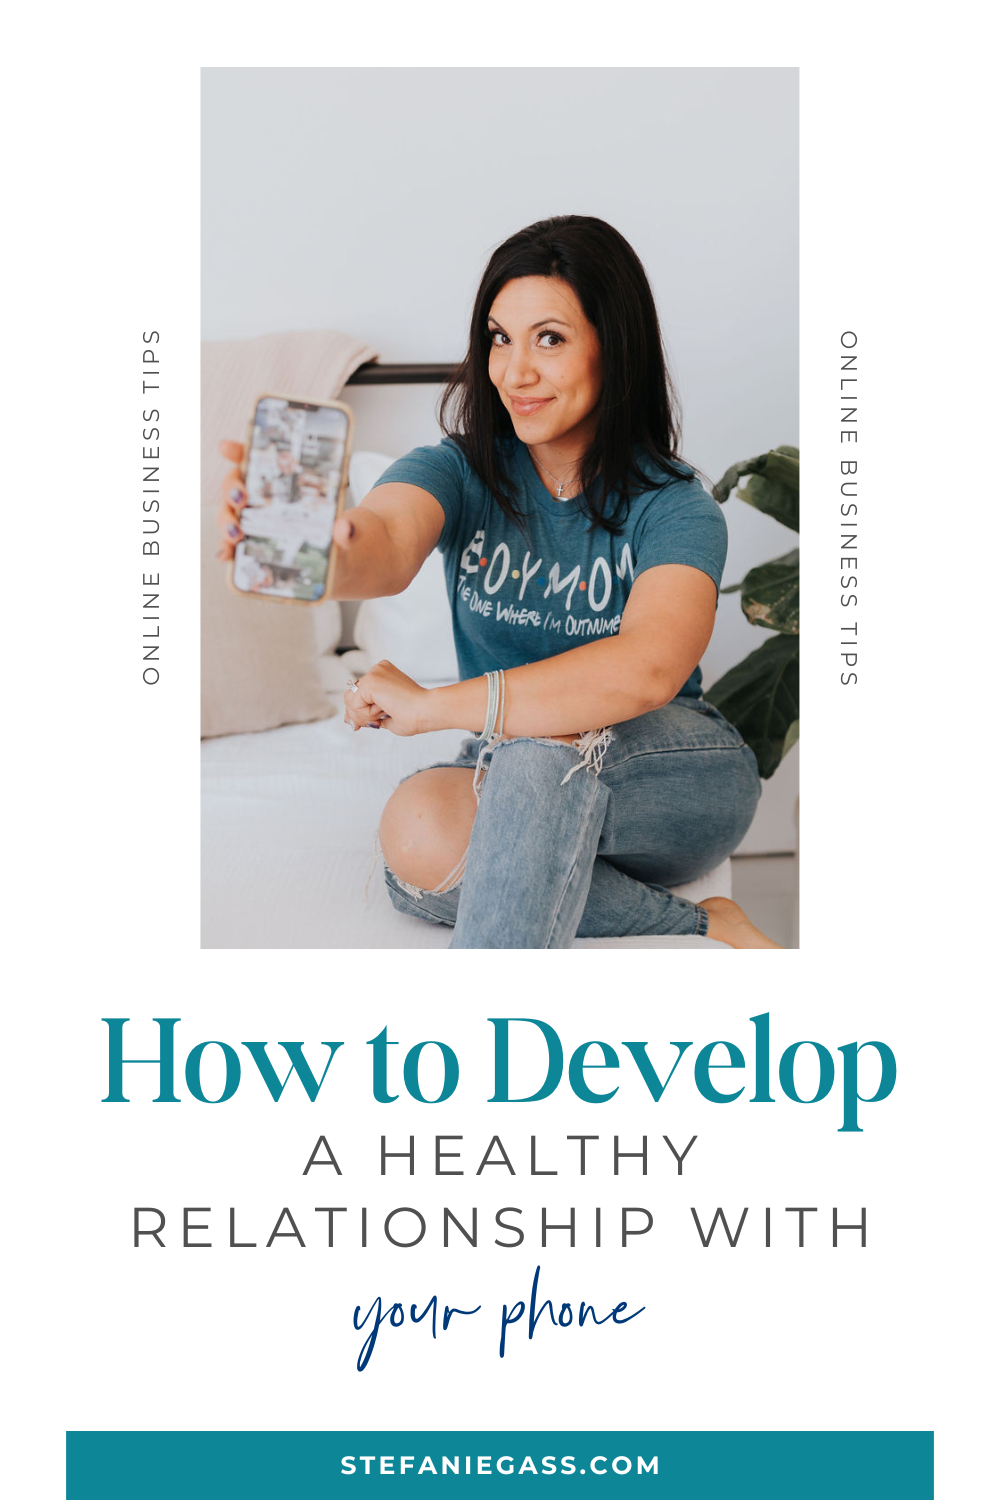 Brown haired women sitting with legs crossed, wearing jeans and teal t-shirt, holding phone out with a smile on her face, plant next to her. Text says: How to Develop a Healthy Relationship With Your Phone